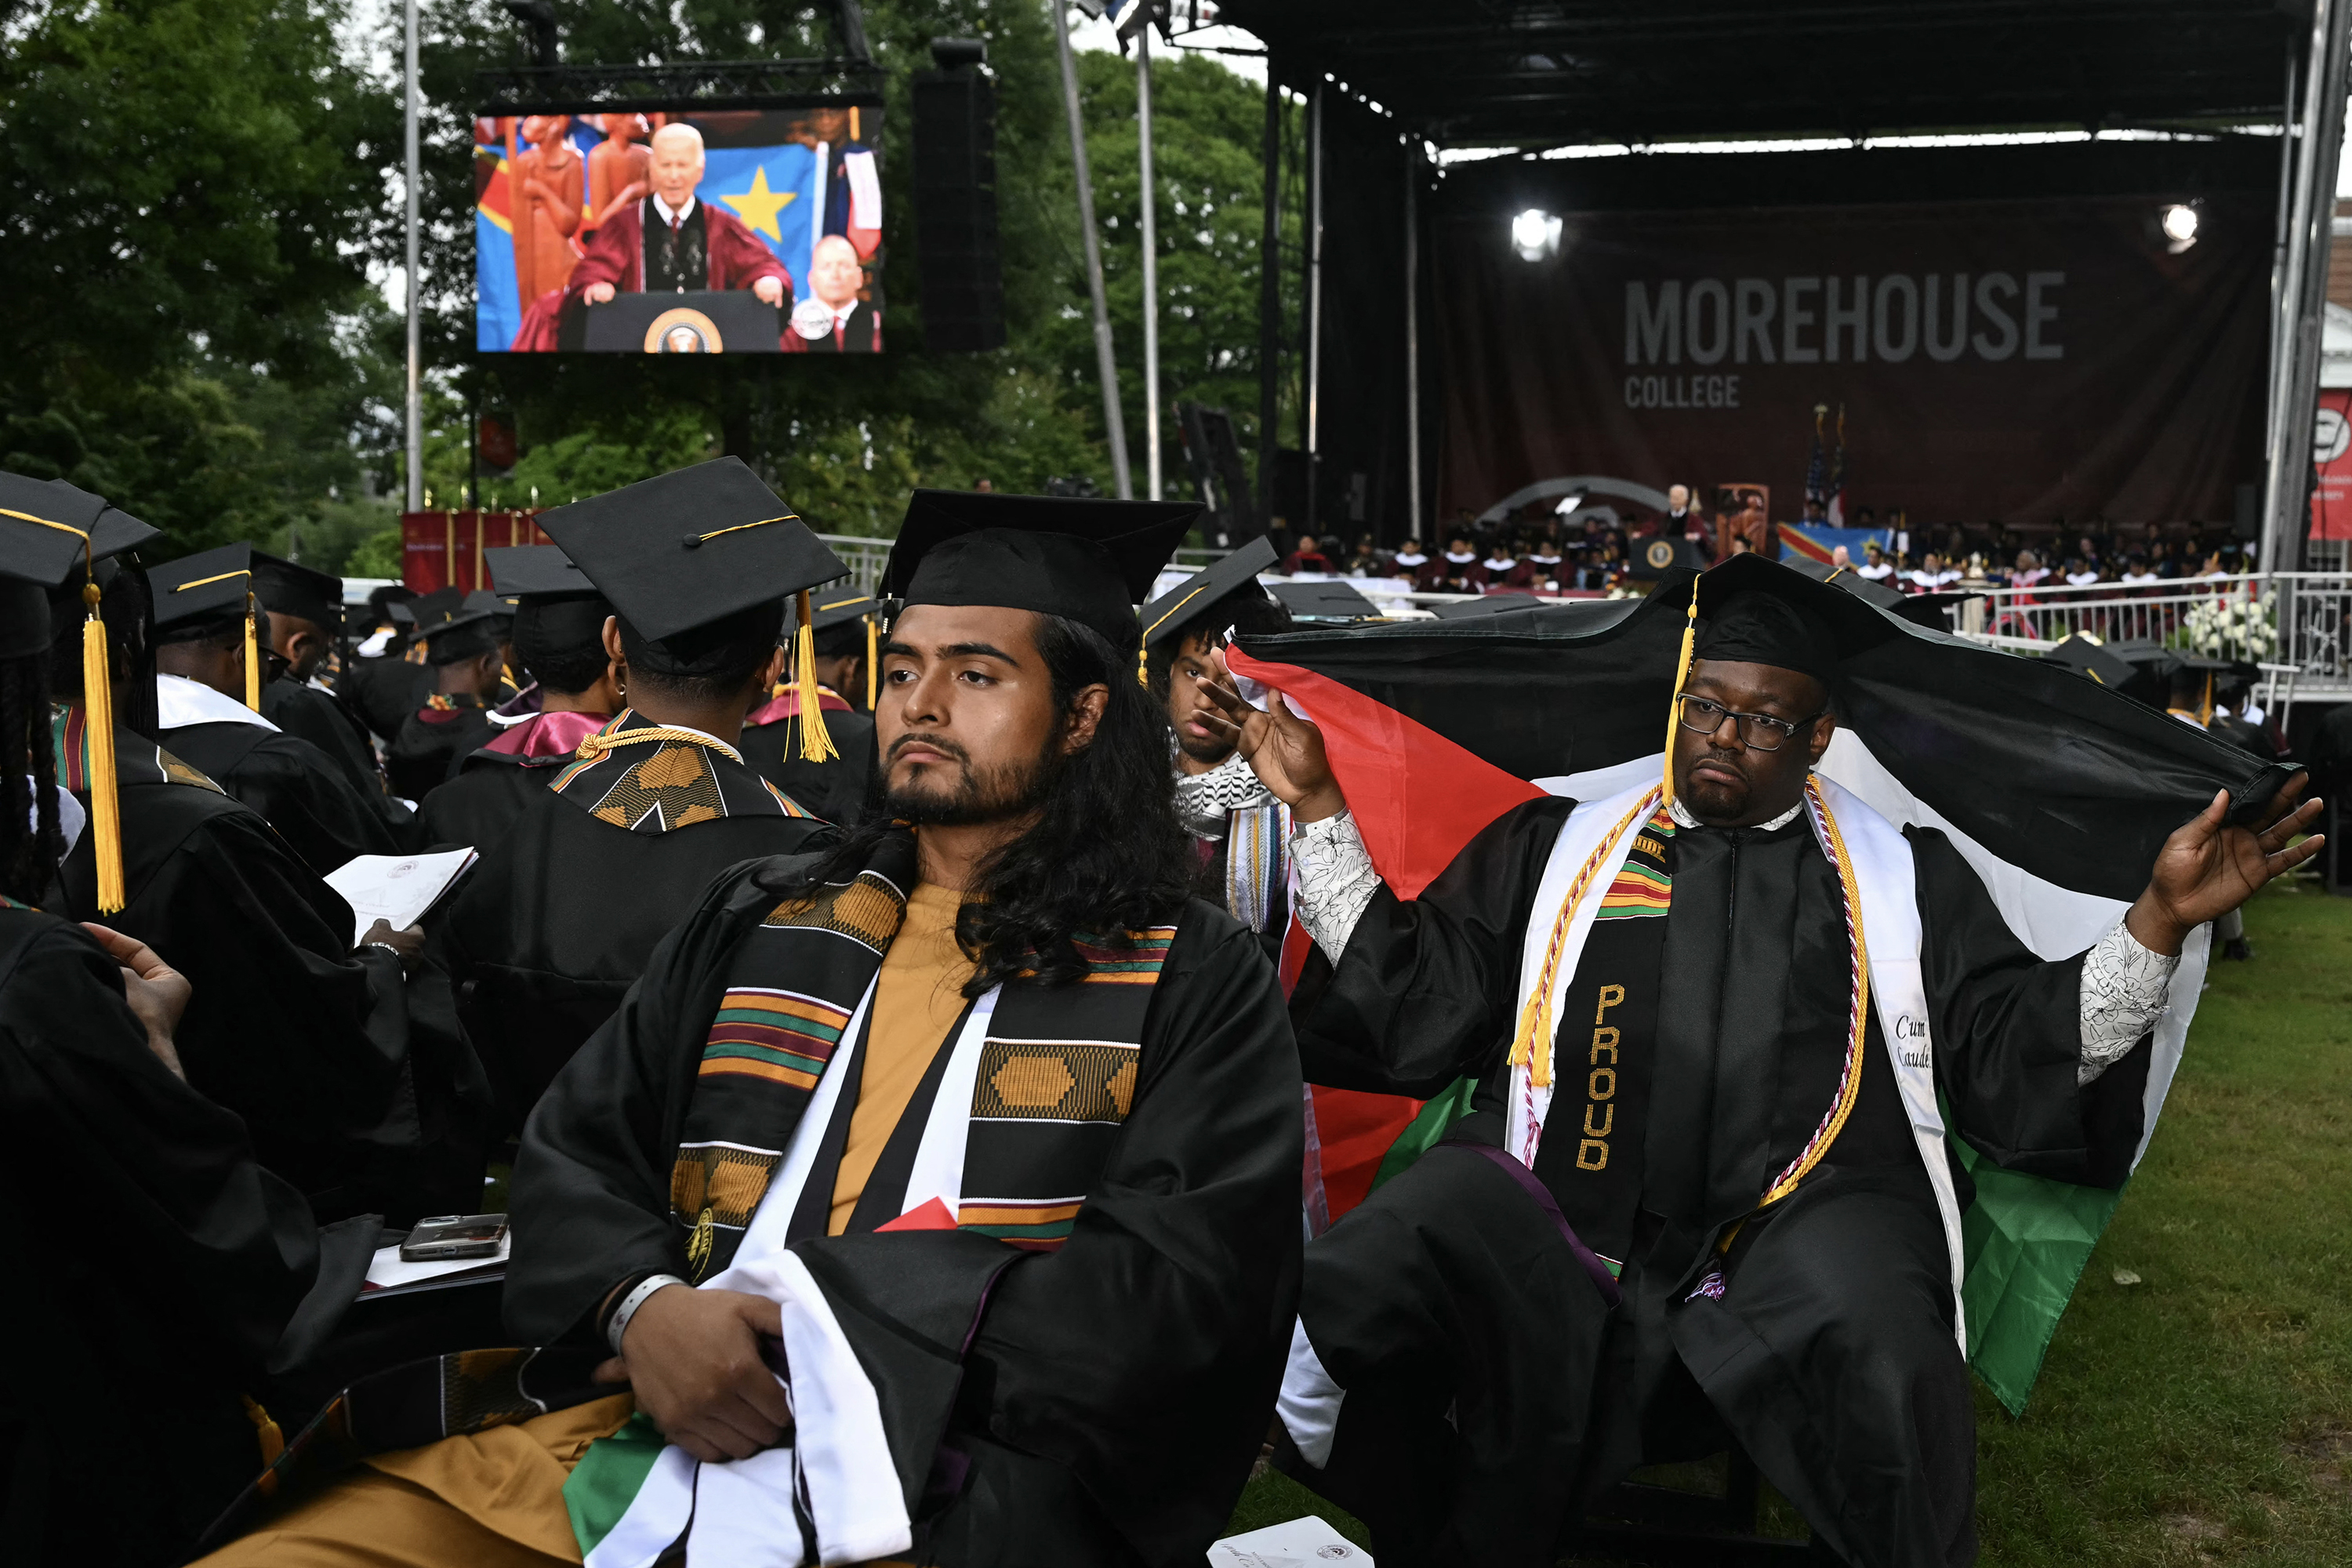 Graduating students turn their backs on President Joe Biden as he delivers a commencement address at Morehouse College in Atlanta on May 19.